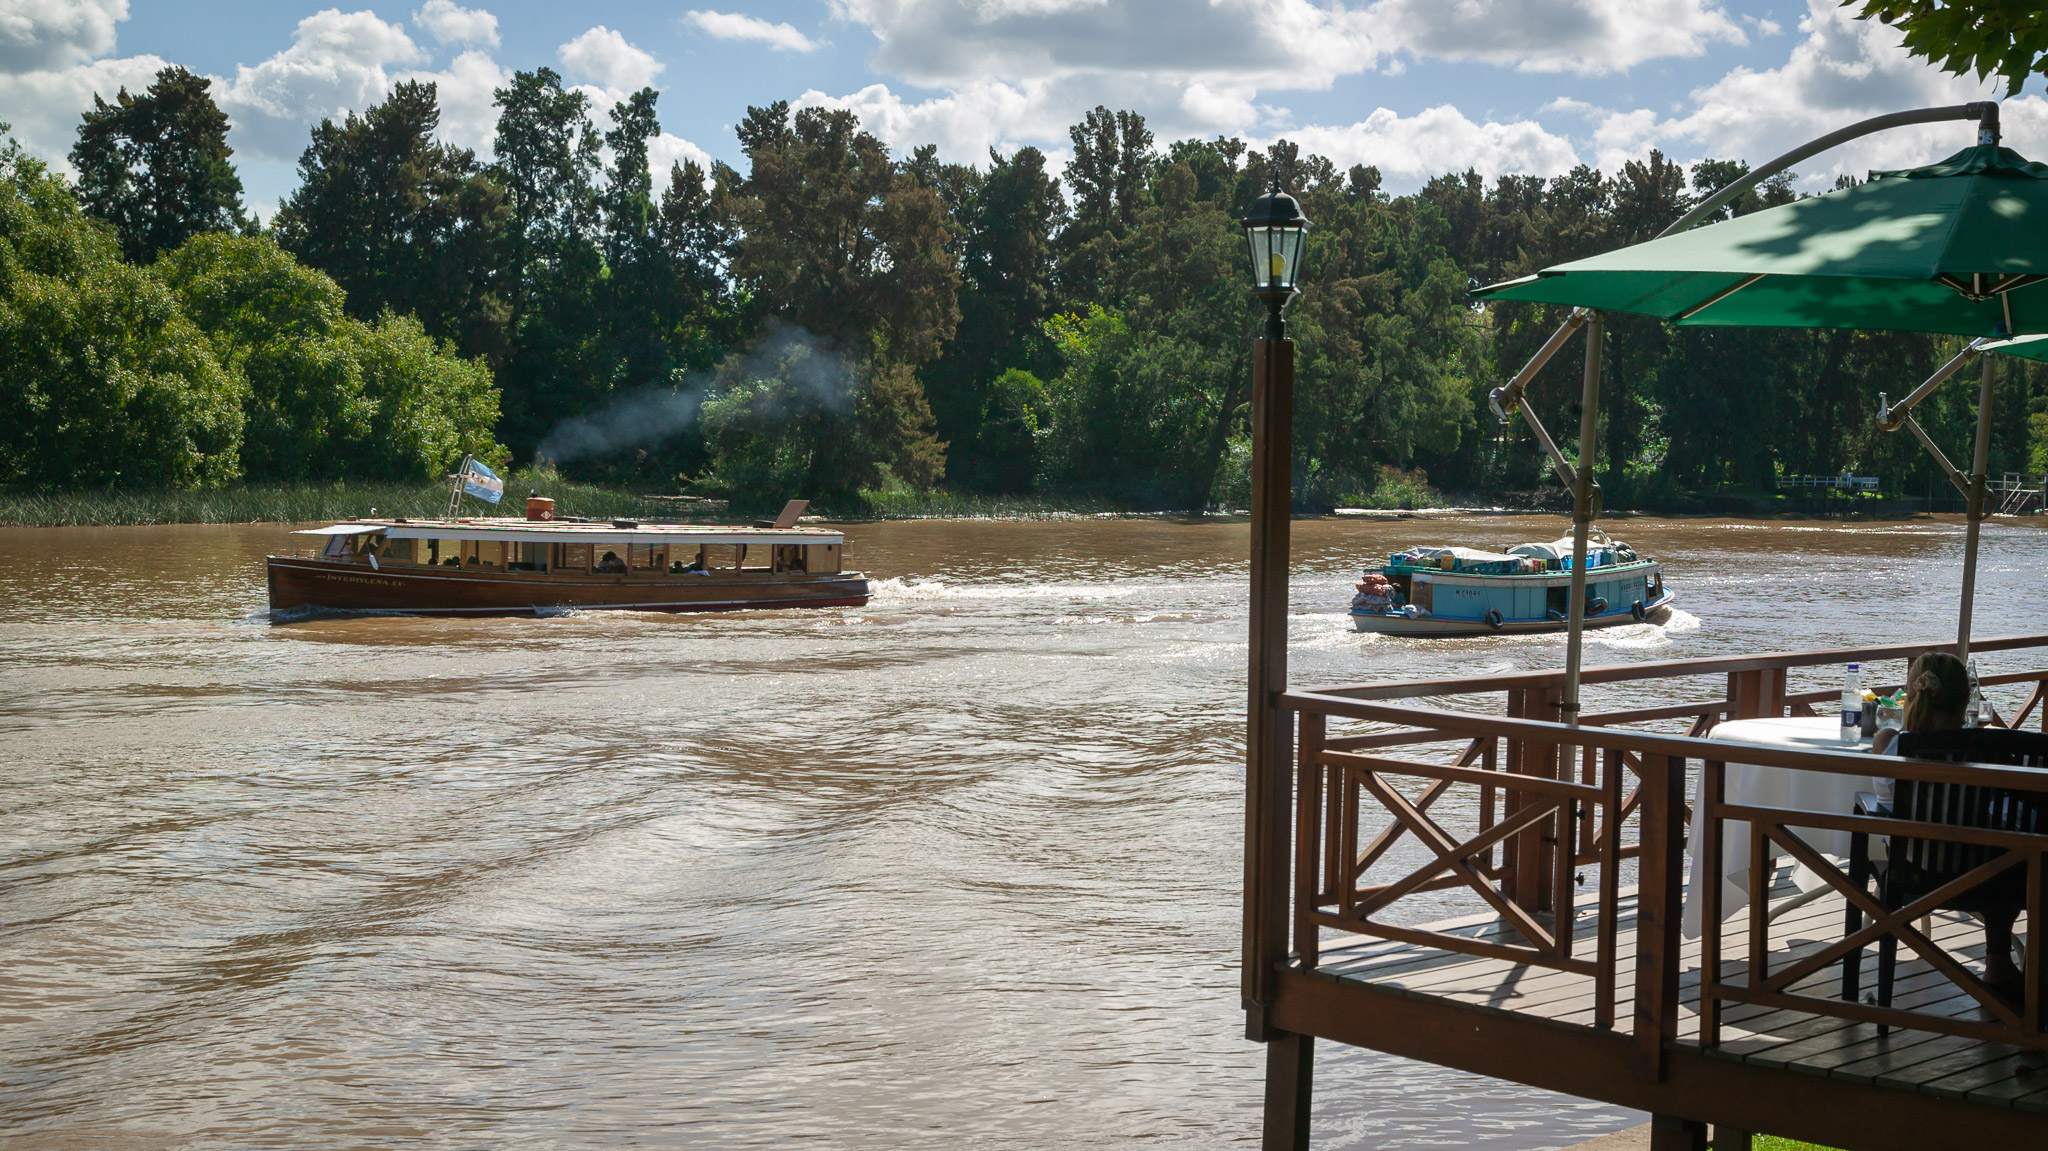 Our lunch stop at Gato Blanco restaurant, Parana Delta